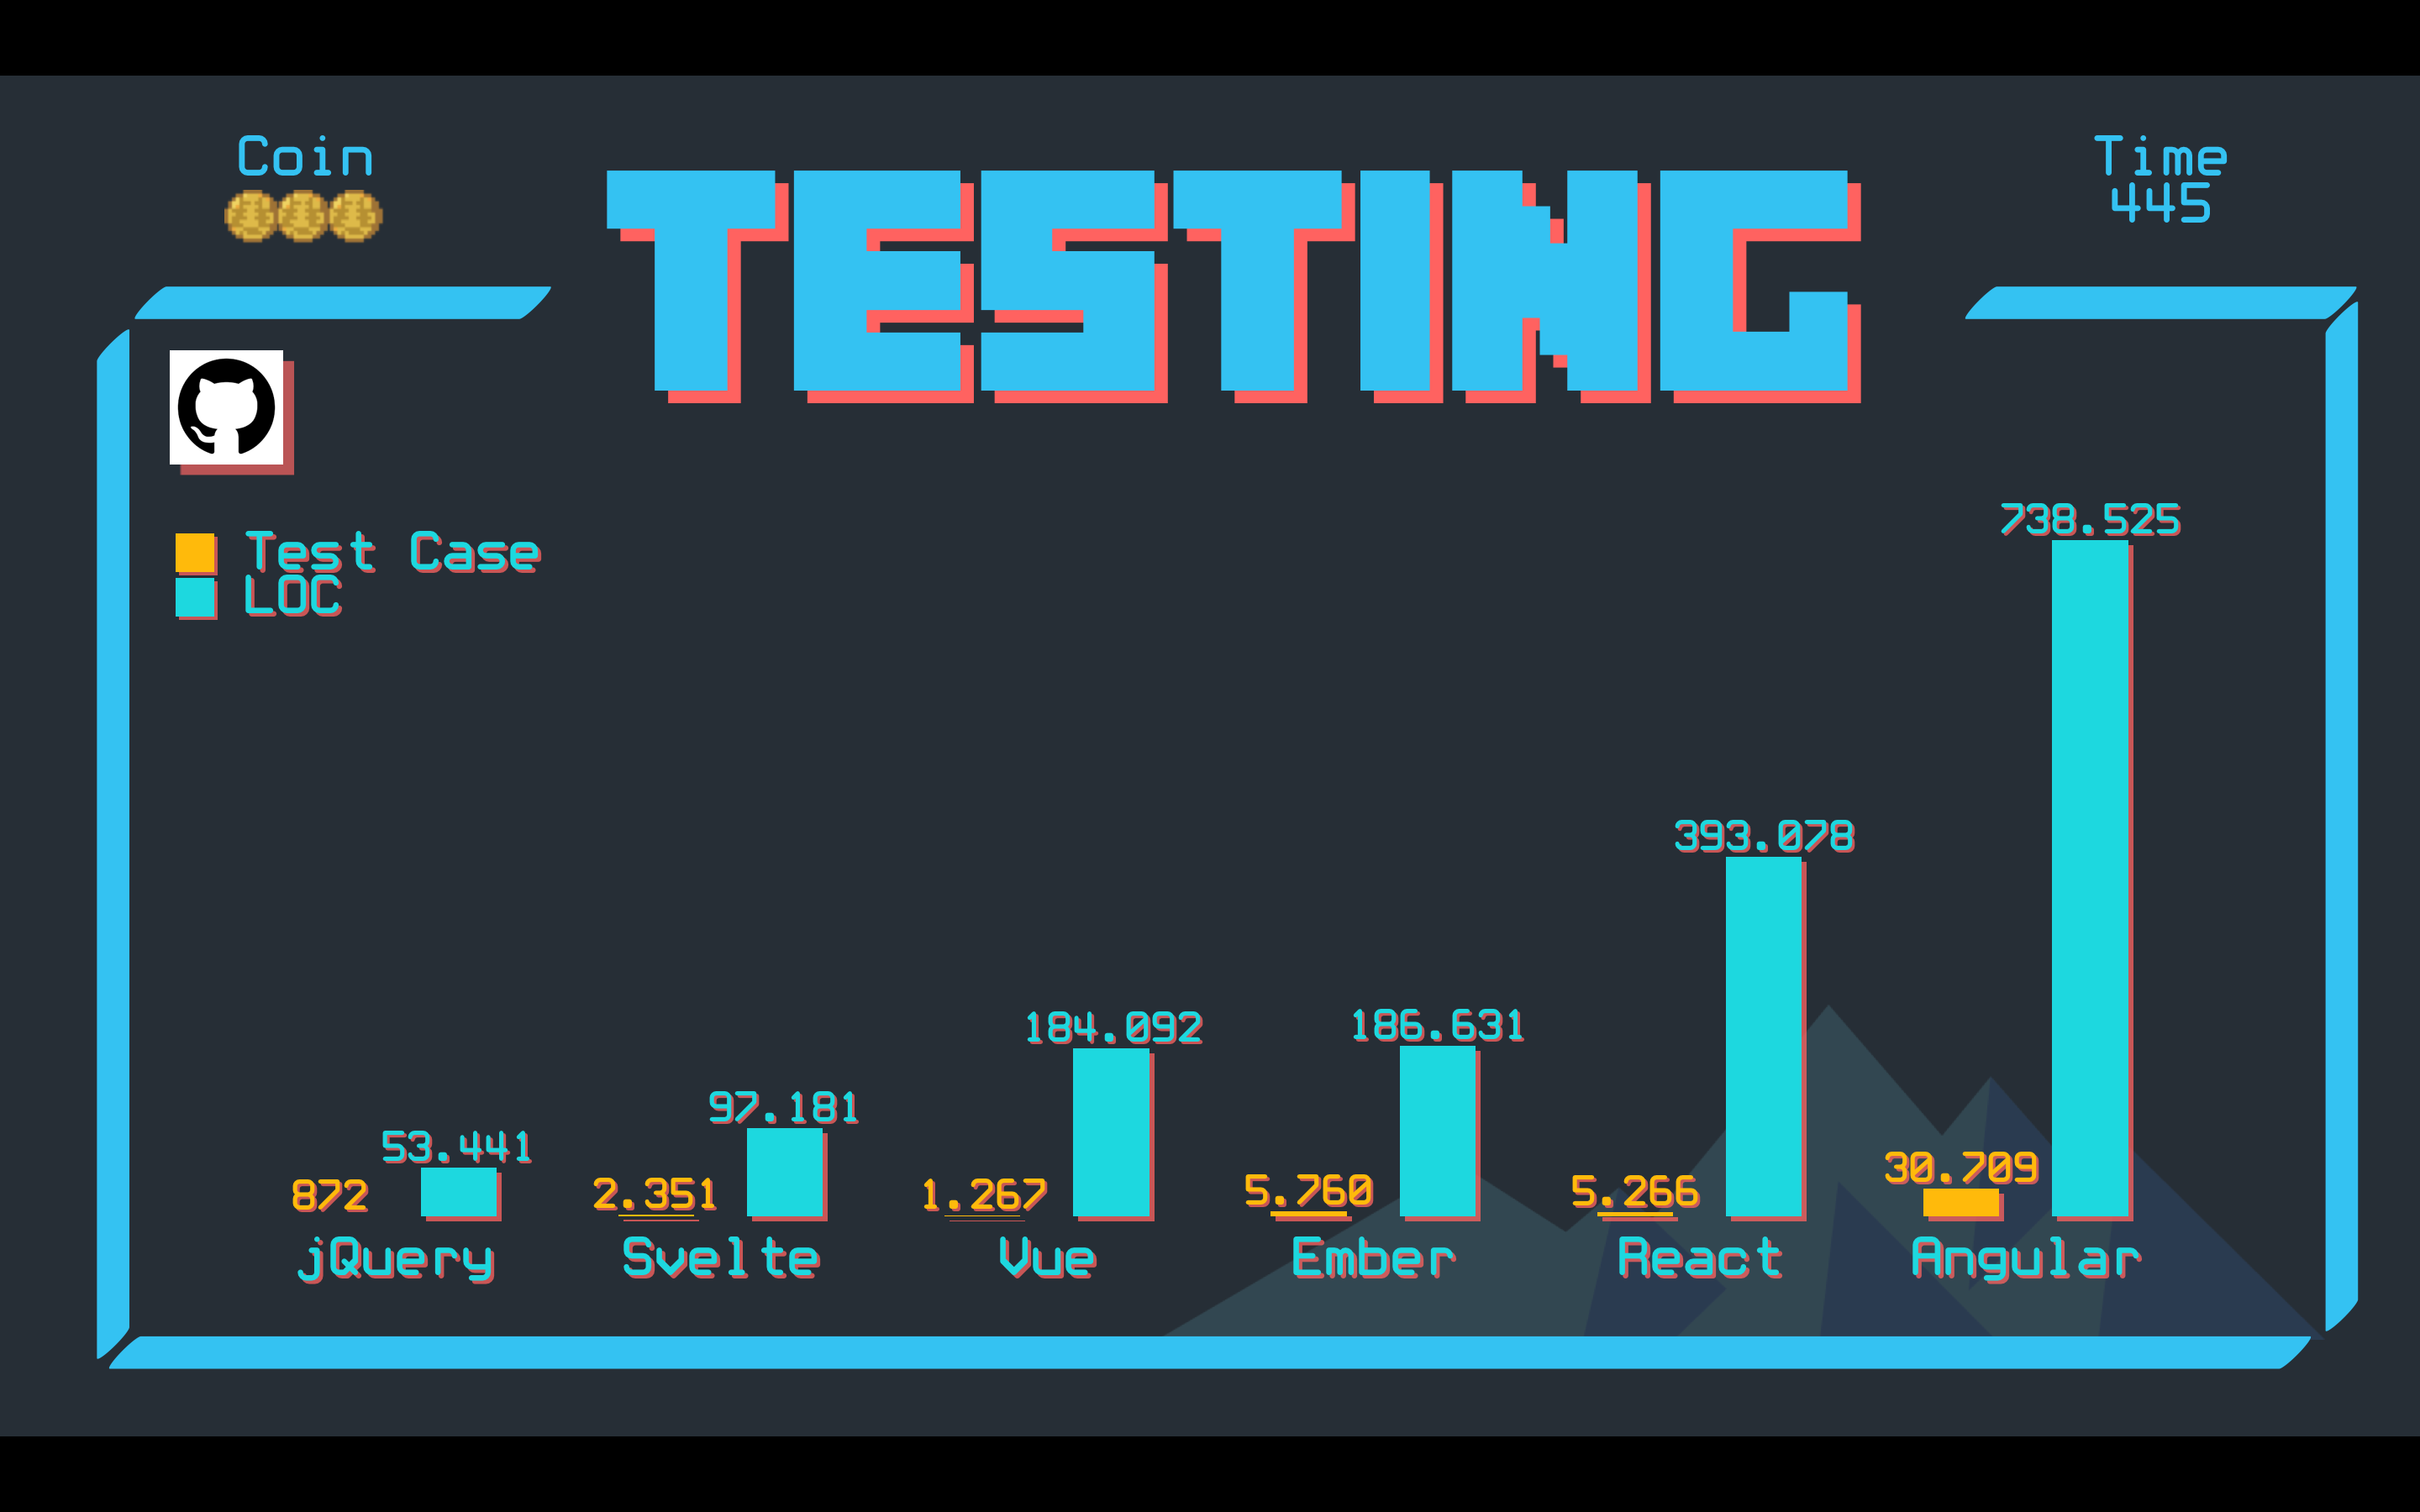 The number of test cases versus the line of codes